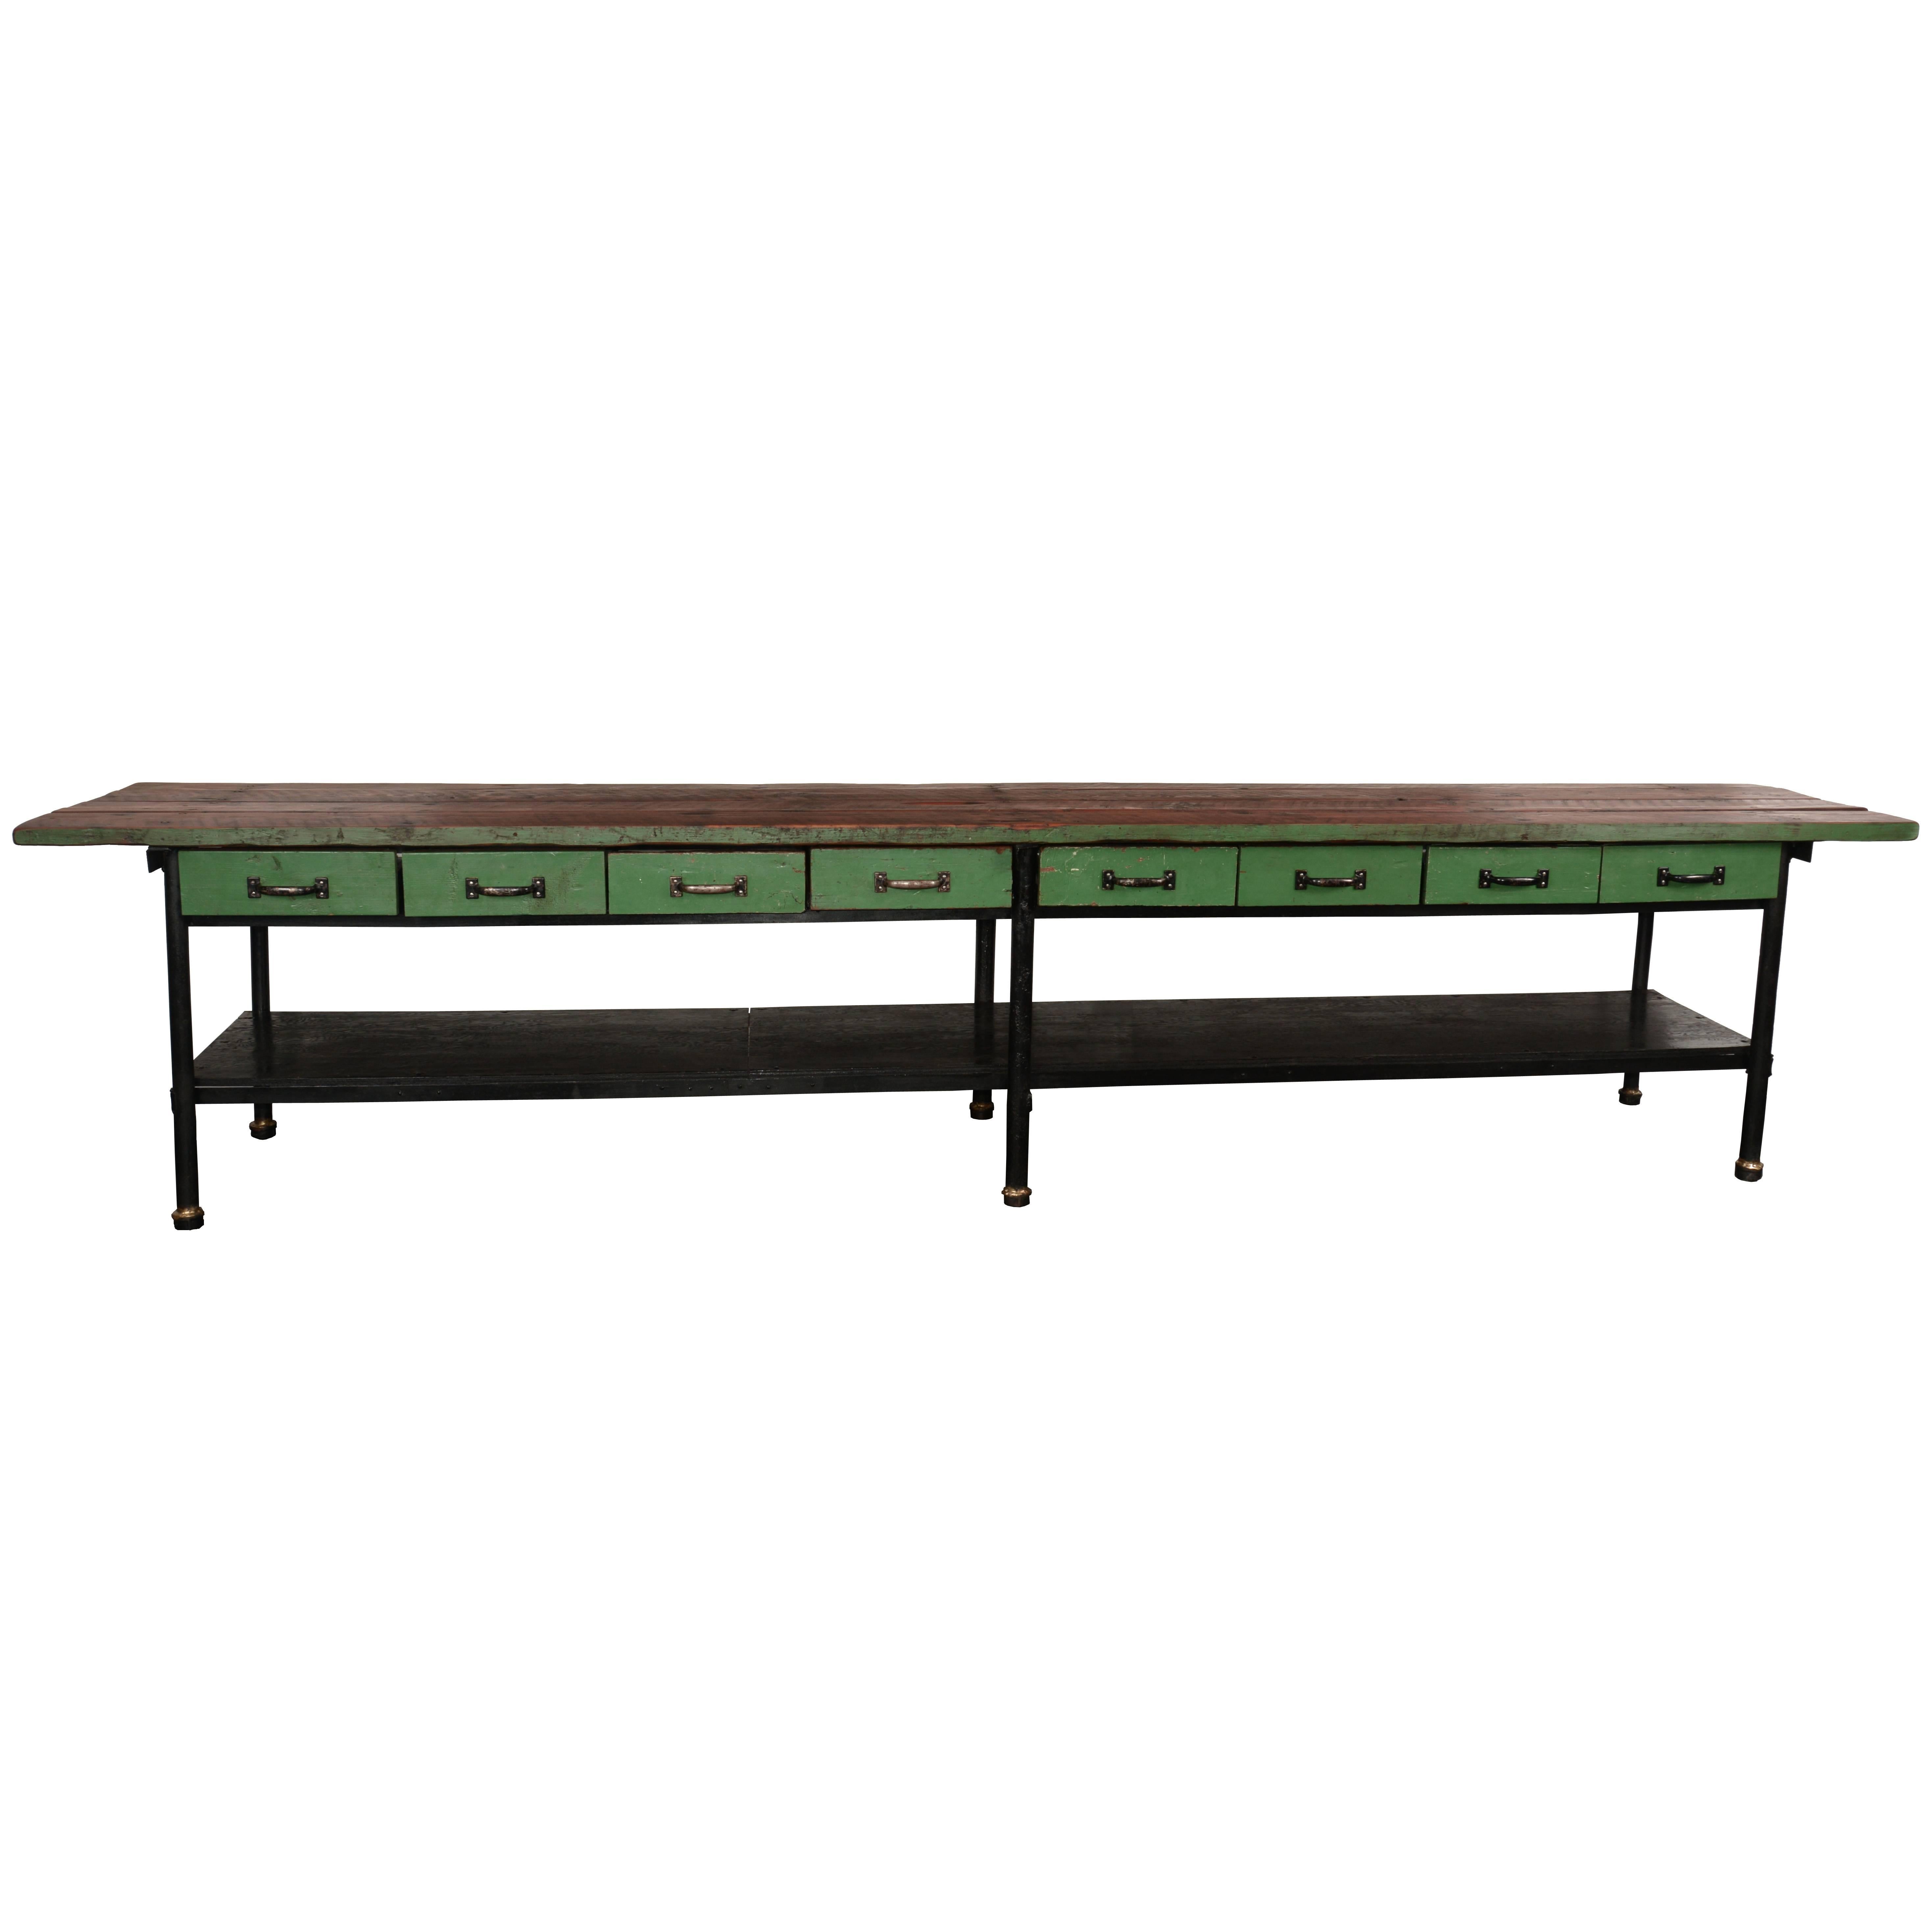 Long green work table. This 14 beauty came out of a machine shop in Northern California. There are eight generous drawers with their original hardware. The frame is steel with Douglas fir plank top and a black painted plywood lower shelf. The back